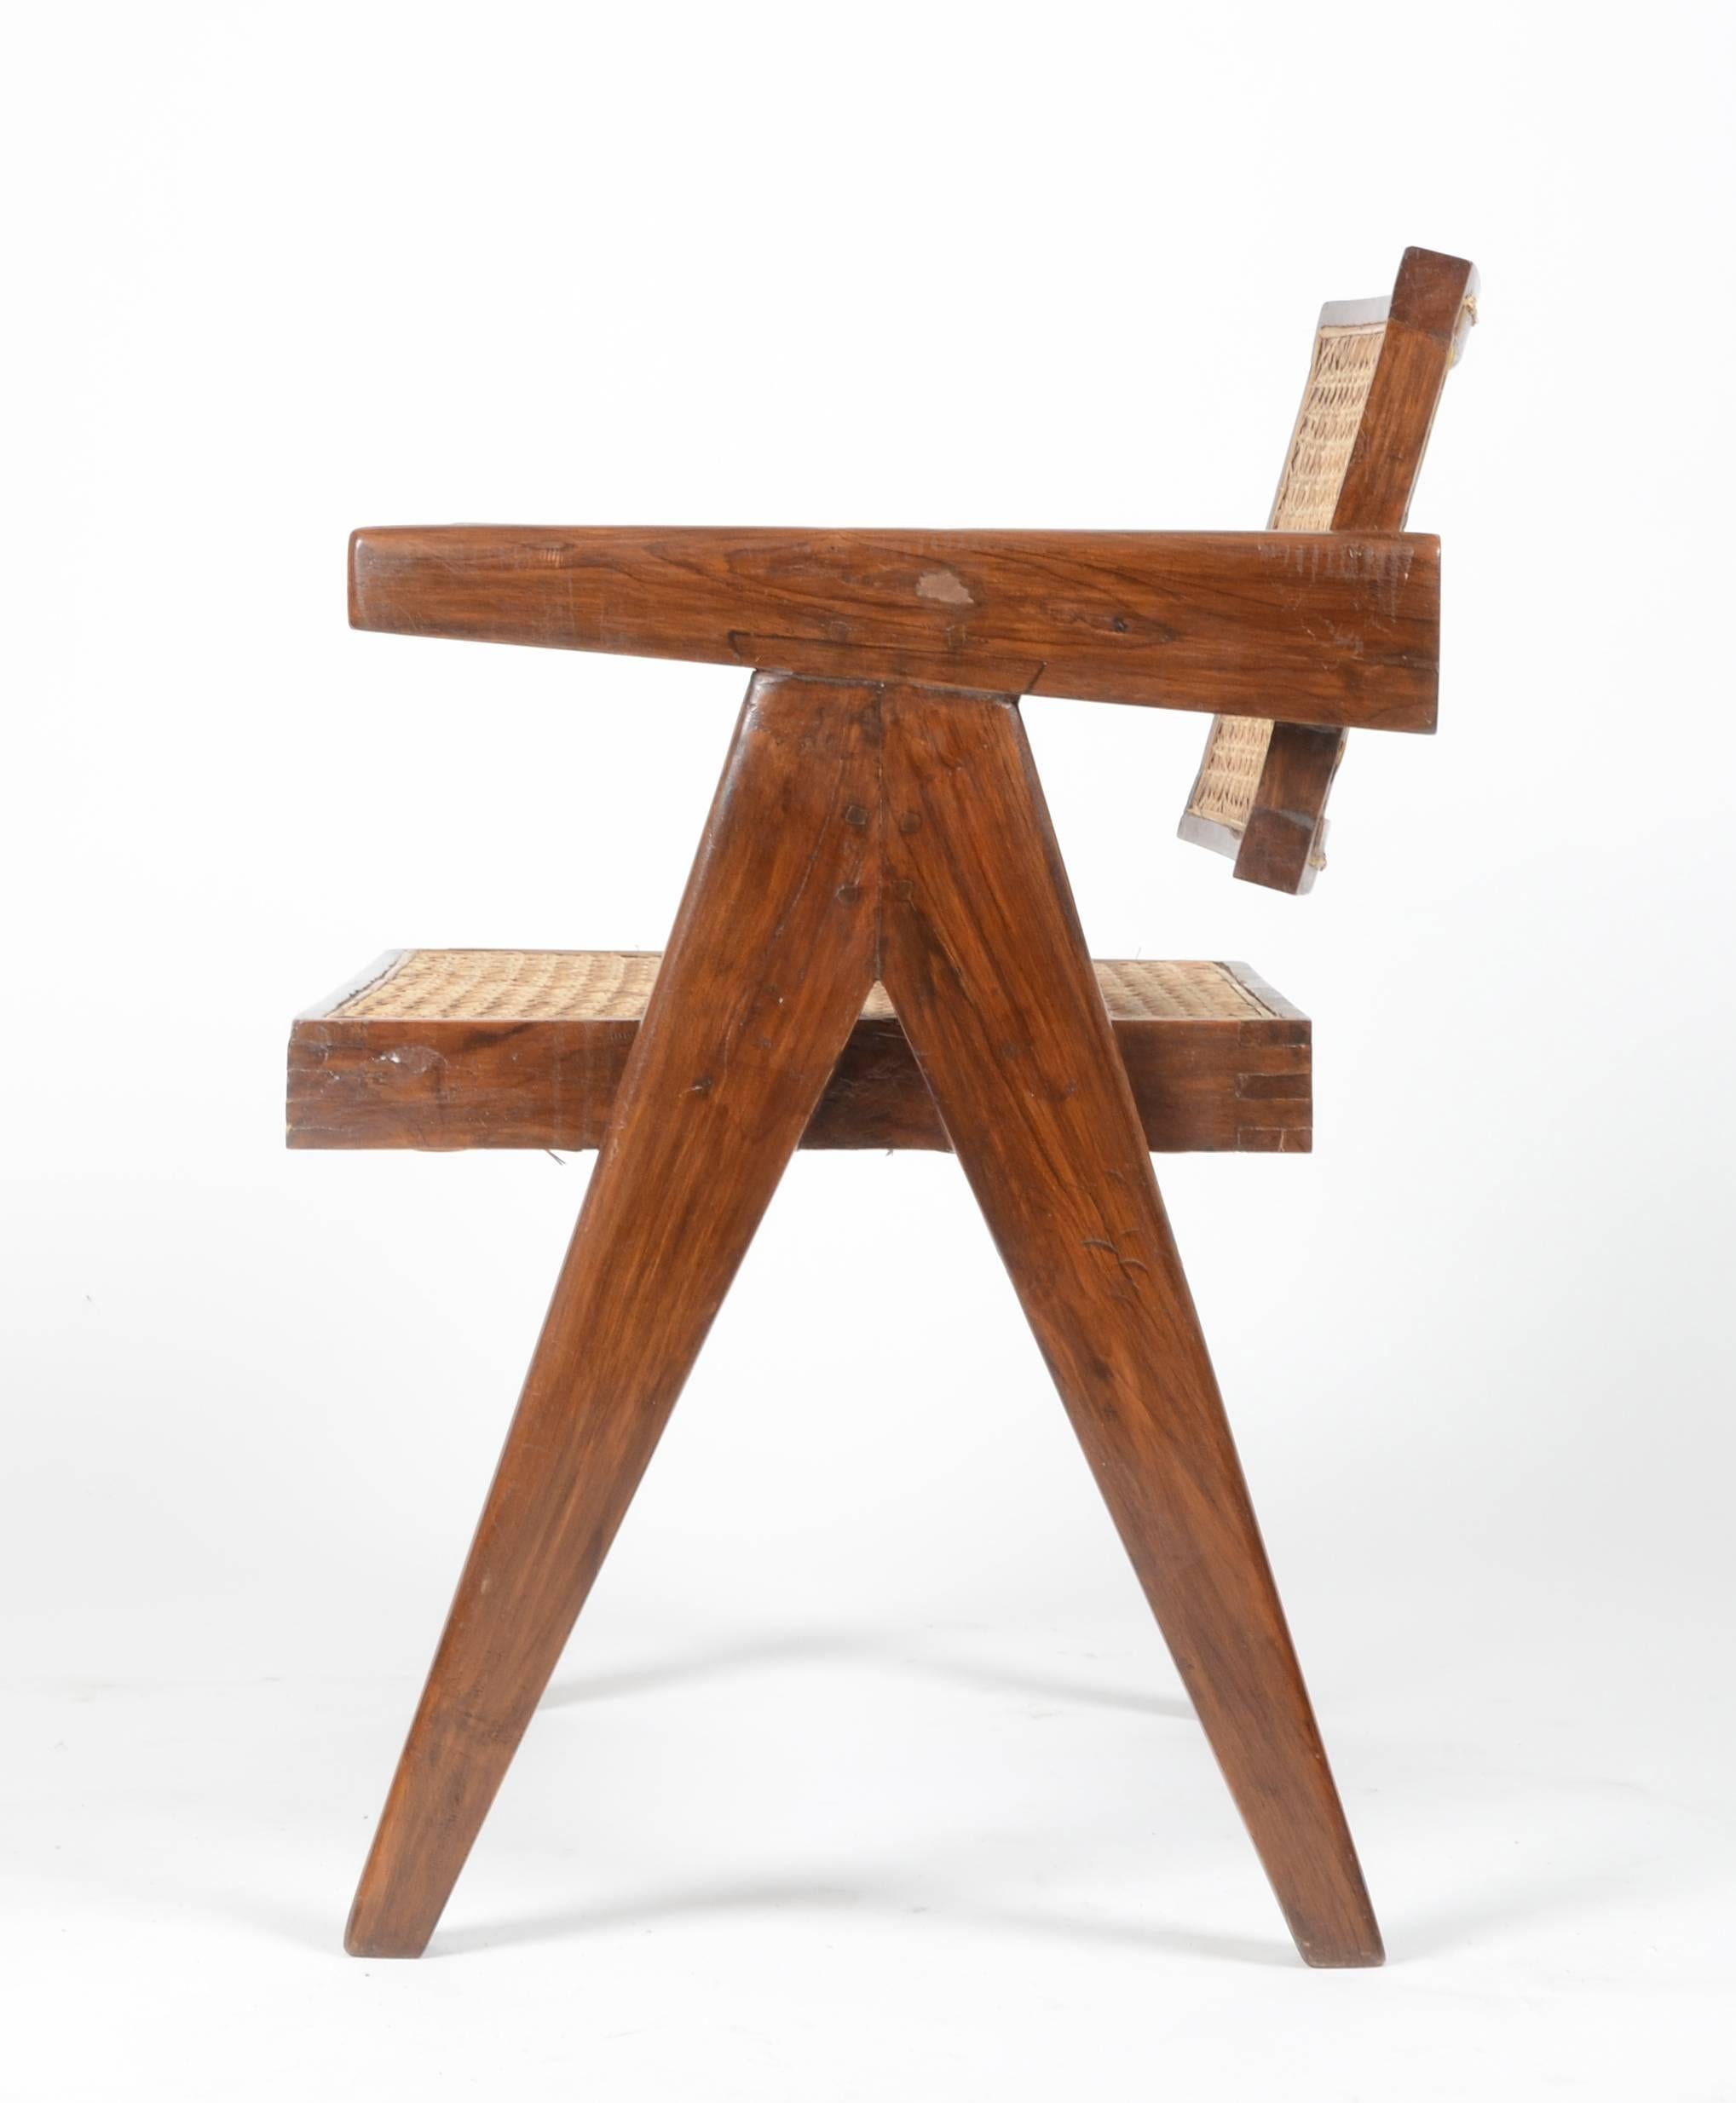 Mid-20th Century Pierre Jeanneret, Desk and Chair, Chandigarh, India, 1950s